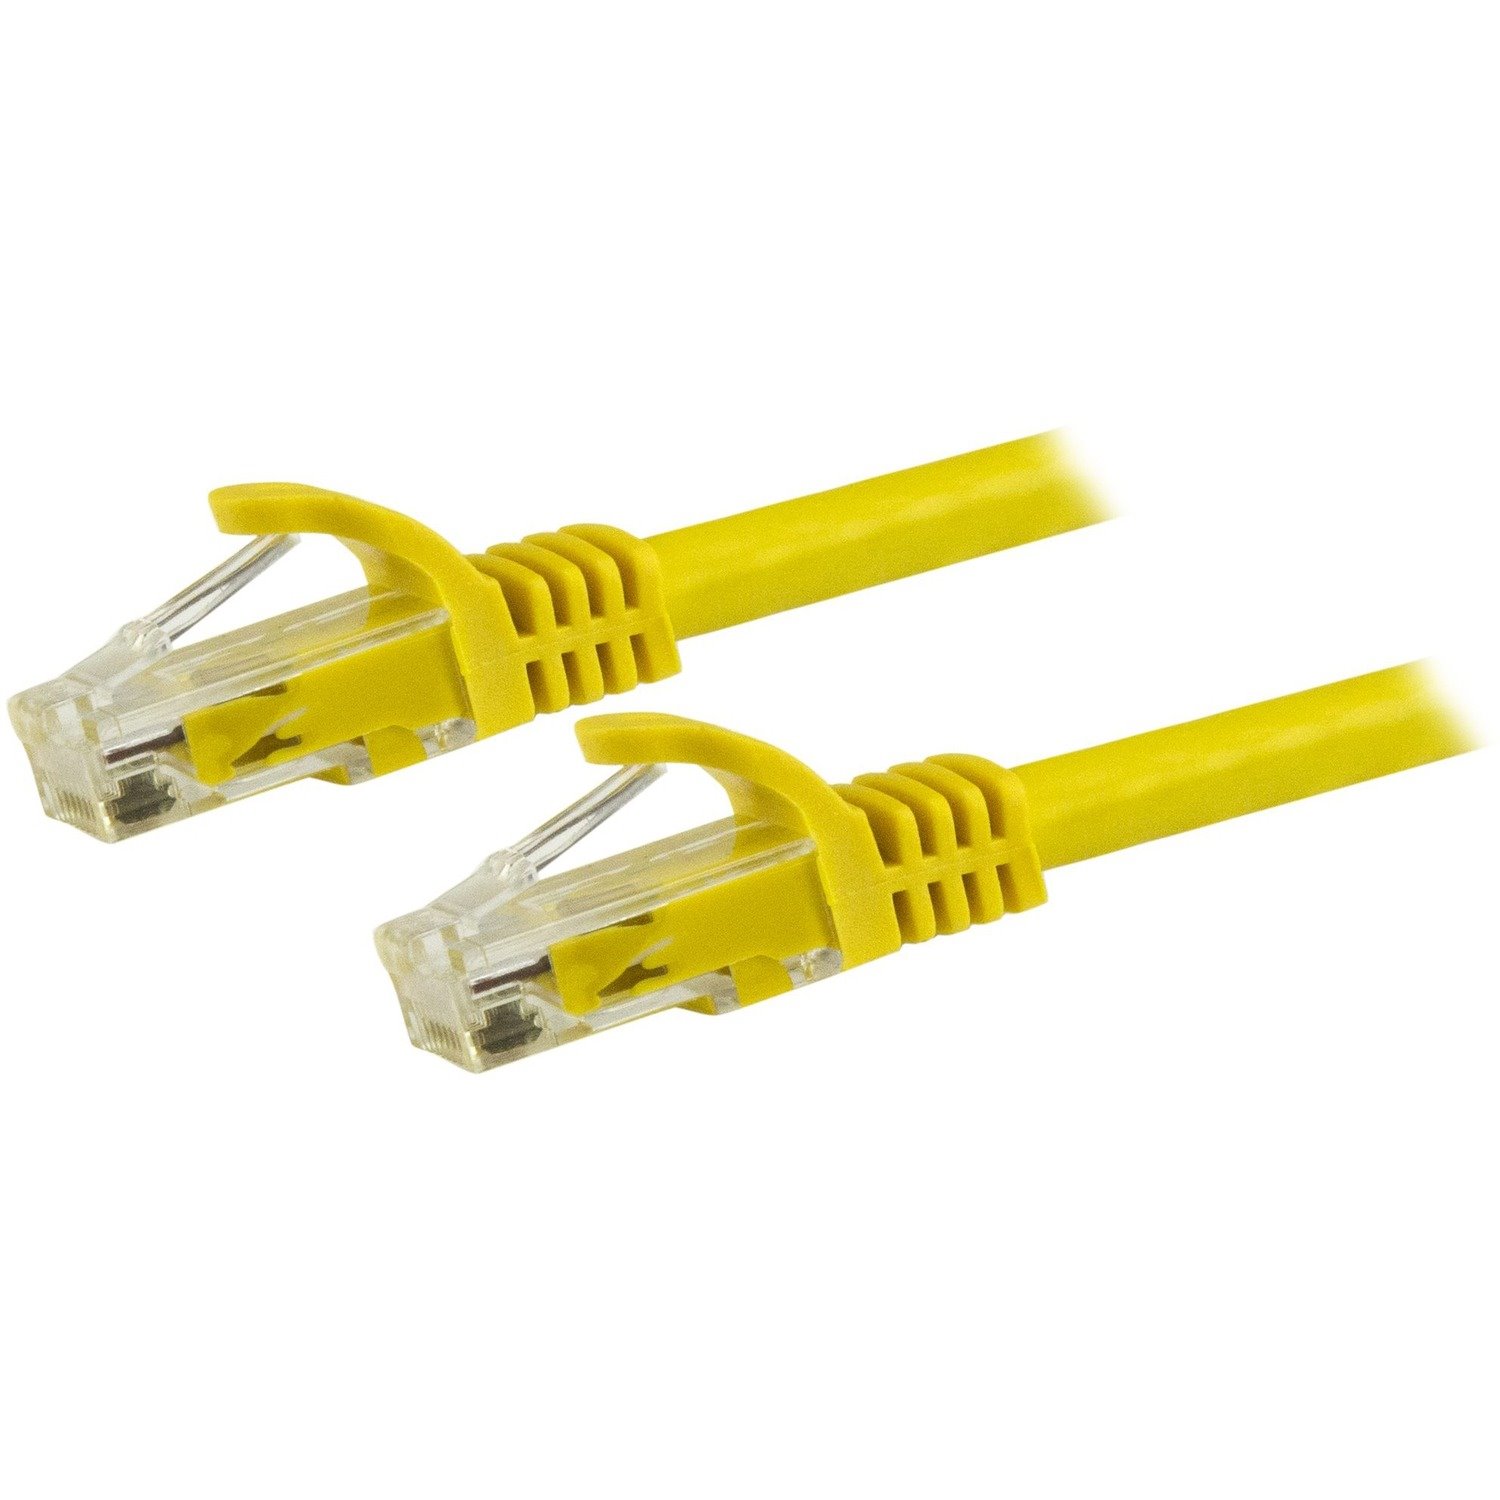 StarTech.com 15 m Category 6 Network Cable for Network Device - 1